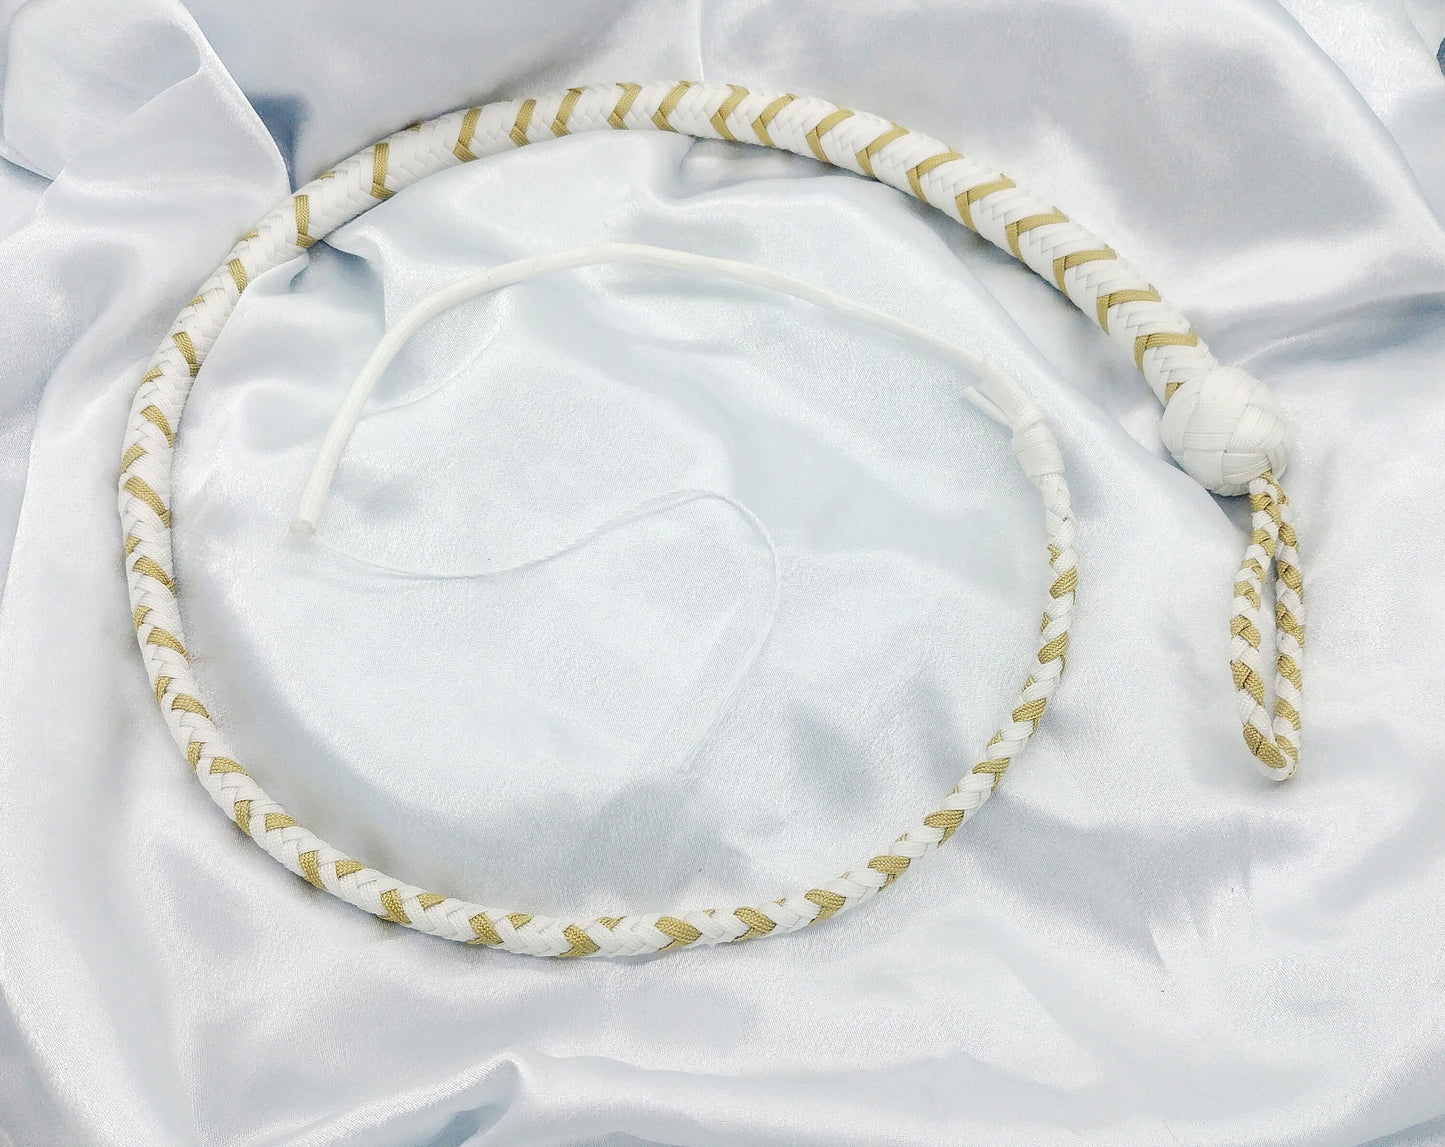 White and gold paracord whip